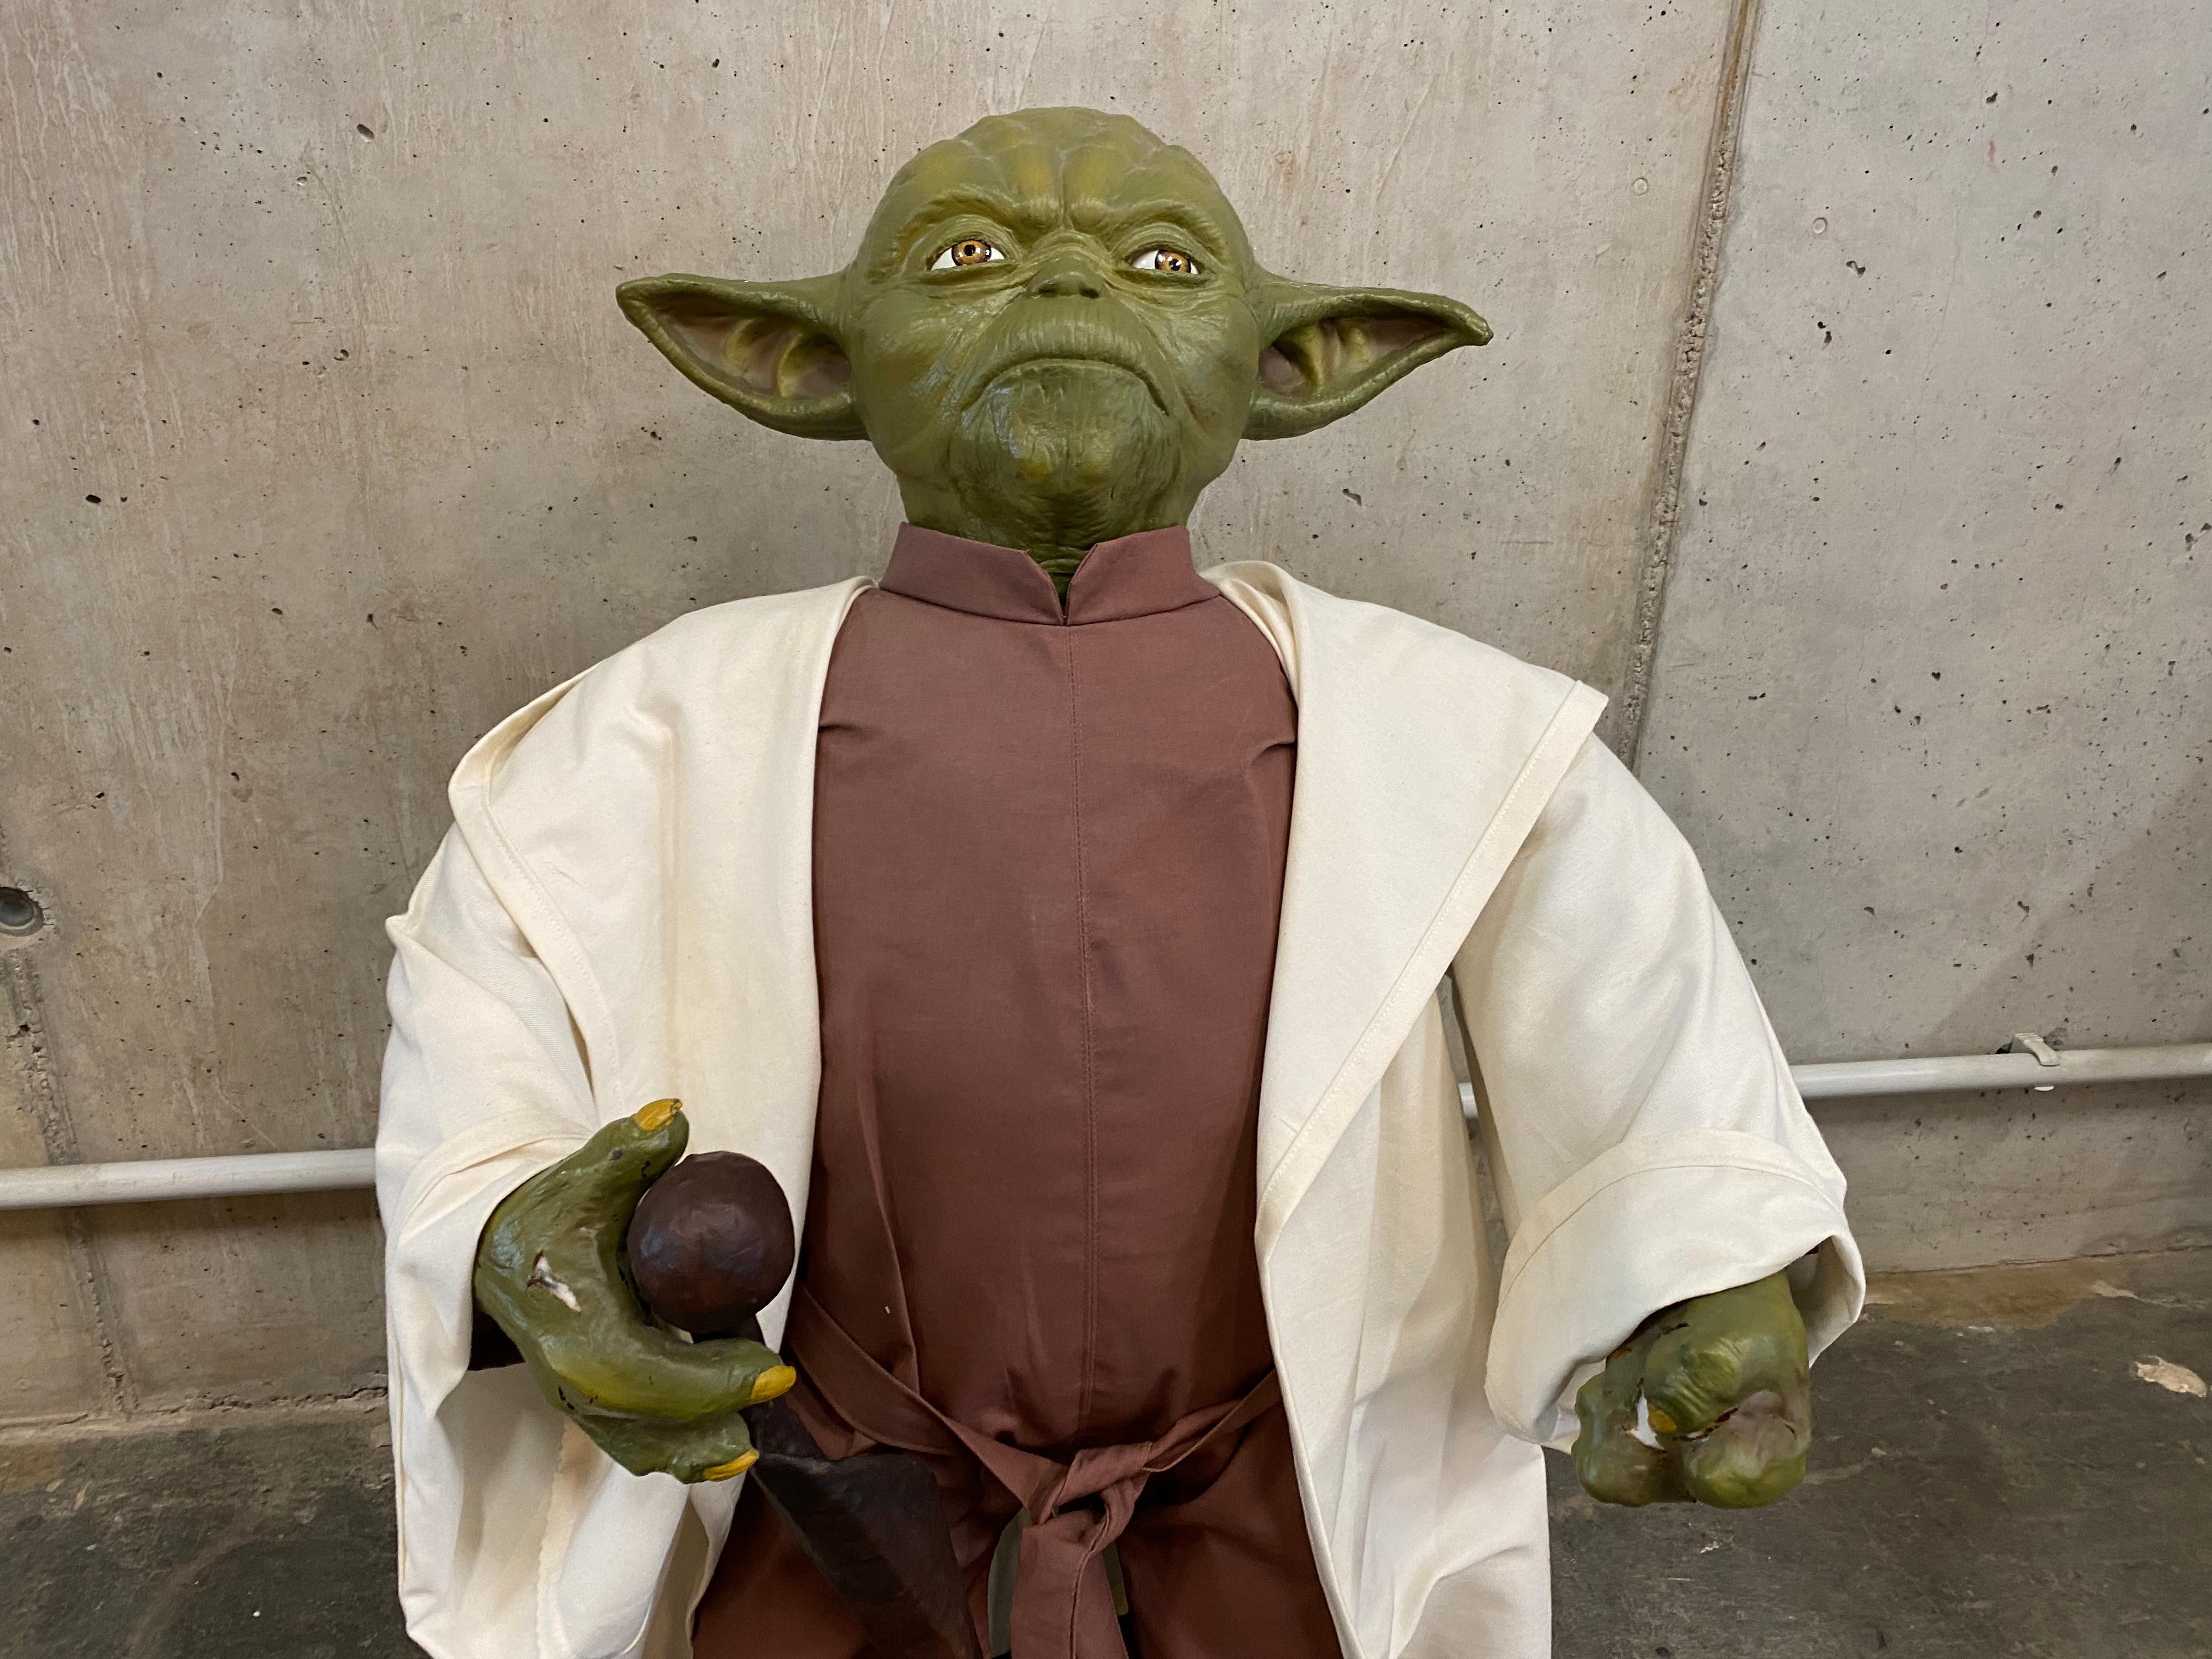 This life-size Master Yoda figure is an old photo prop from the original and legendary Star Wars movie - Ewoks - Battle for Endor - from 1985.

The figure is made of silicone, hand-painted and handmade. There was only an edition of 50 pieces of